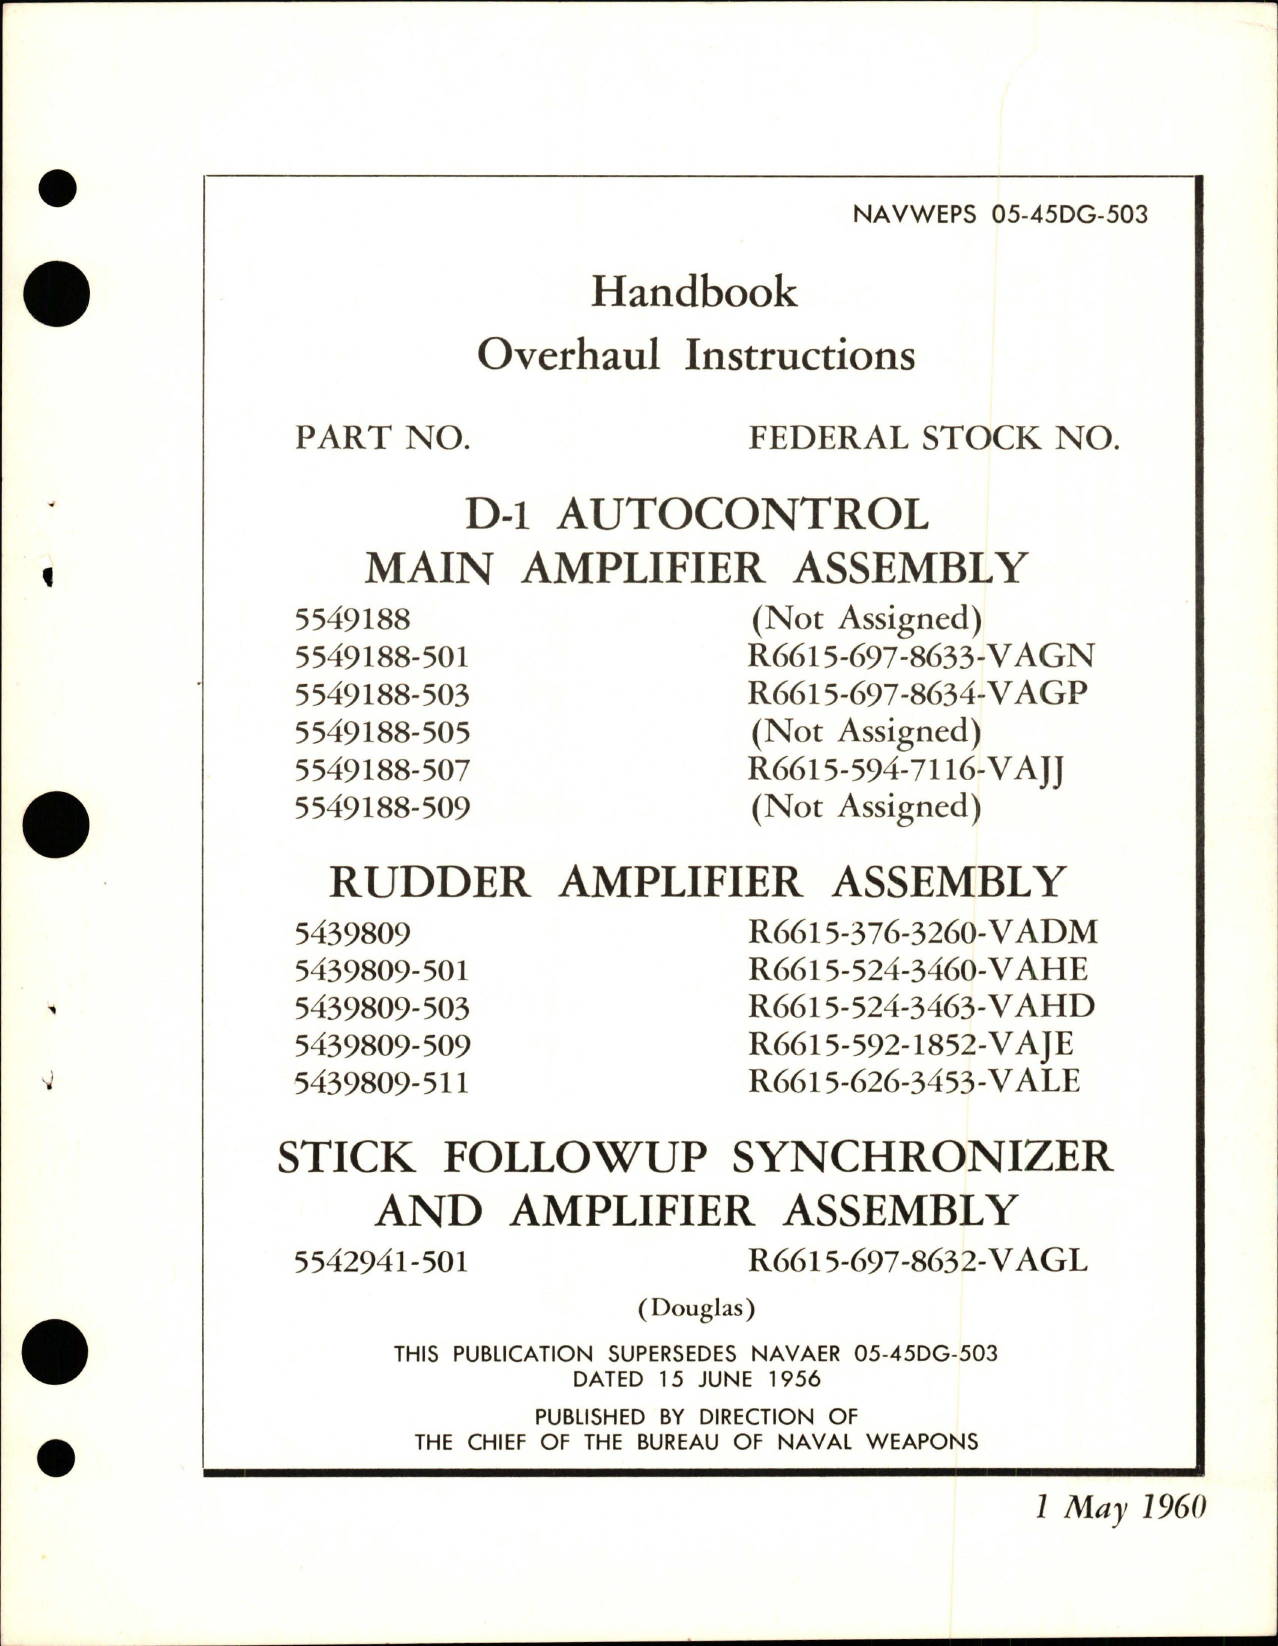 Sample page 1 from AirCorps Library document: Overhaul Instructions for D-1 Autocontrol Main Amplifier Assembly, Rudder Amplifier Assembly, and Stick Follow up Synchronizer